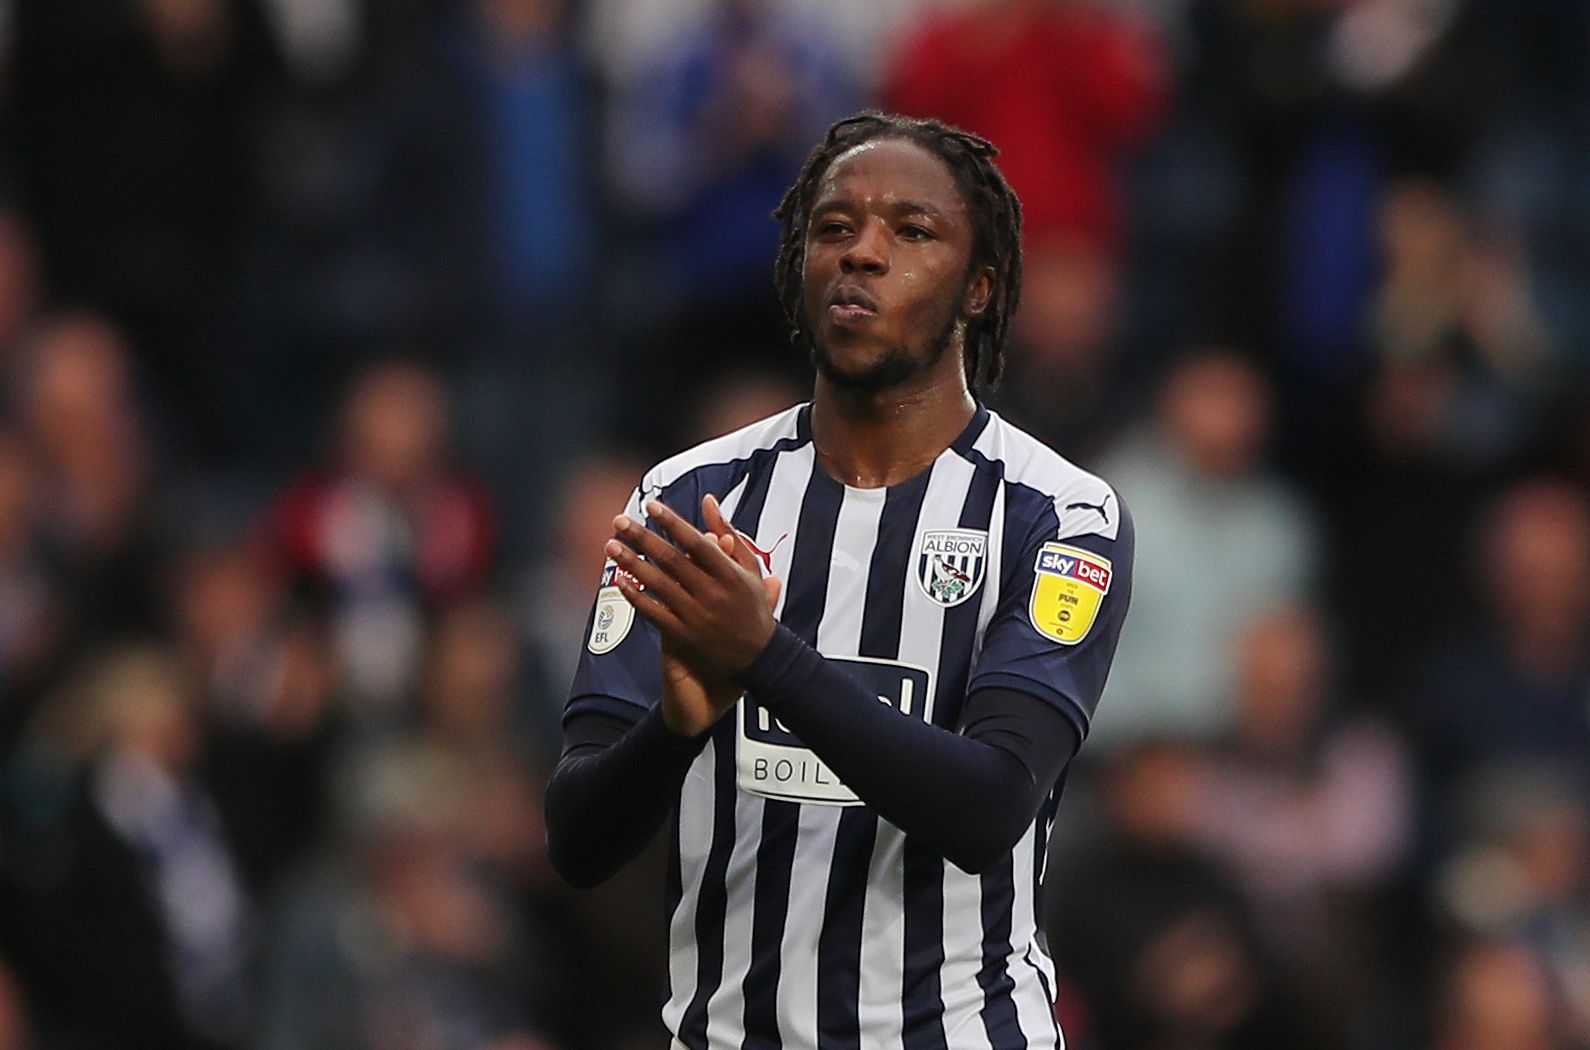 Soccer Football - Championship - West Bromwich Albion v Cardiff City - The Hawthorns, West Bromwich, Britain - October 5, 2019   West Bromwich Albion's Romaine Sawyers applauds fans after the match    Action Images/Molly Darlington    EDITORIAL USE ONLY. No use with unauthorized audio, video, data, fixture lists, club/league logos or 